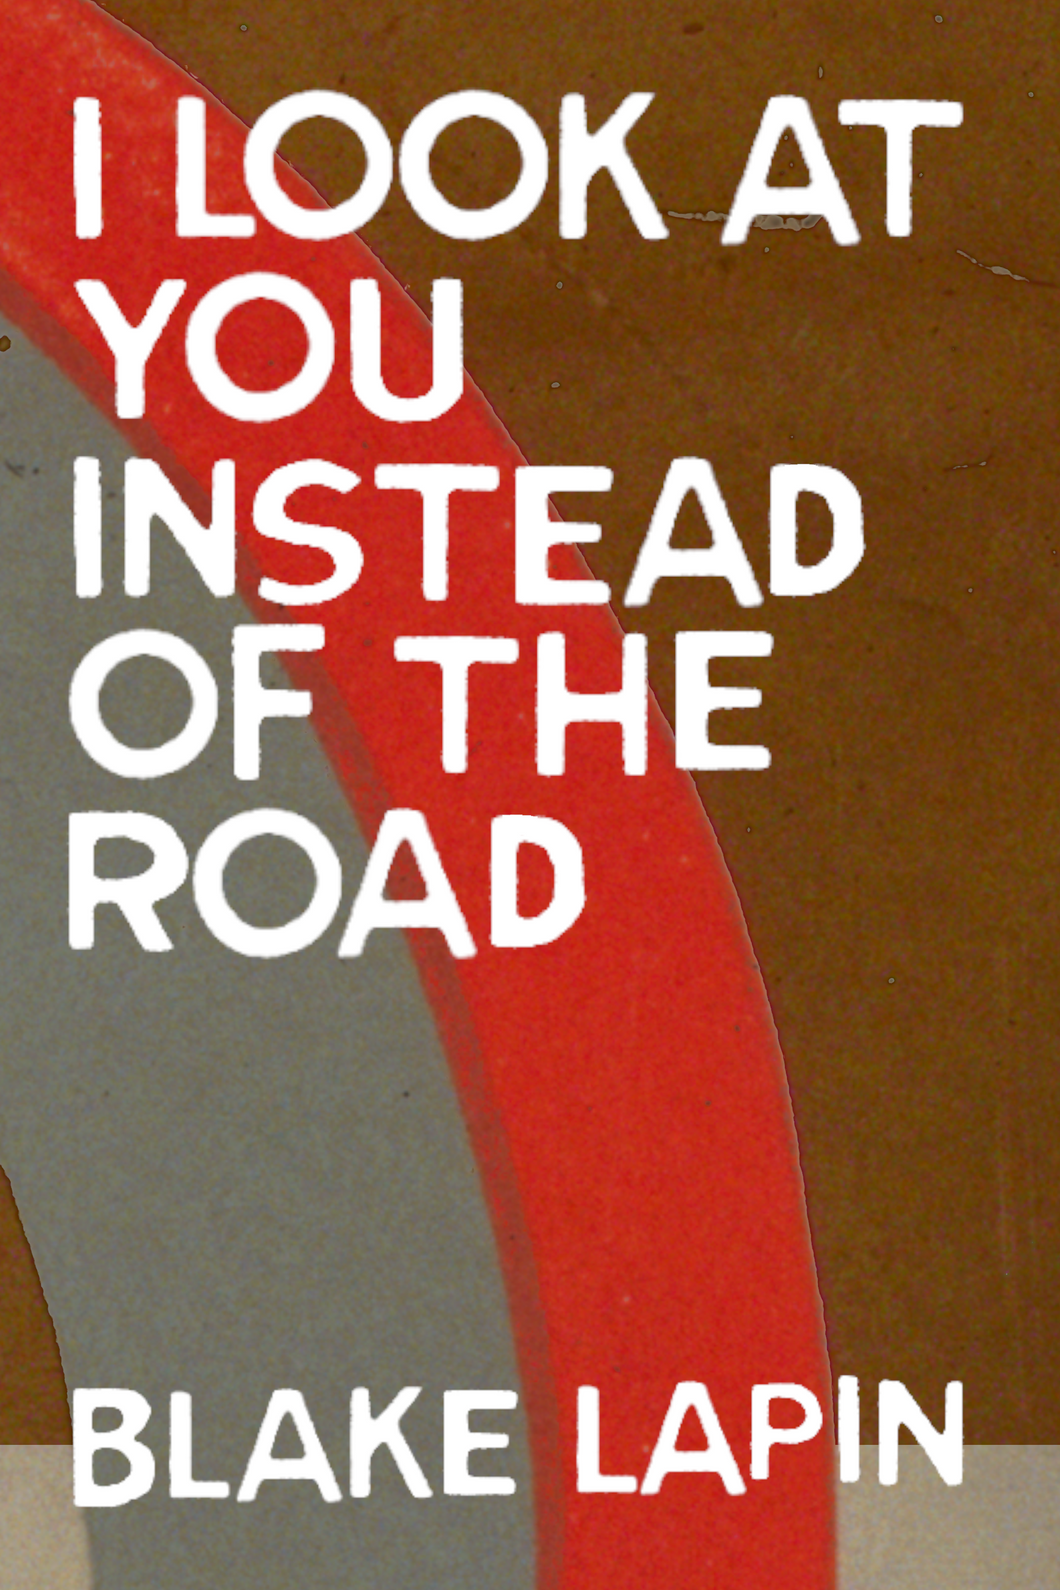 I Look at You Instead of the Road, by Blake Lapin-Print Books-Bottlecap Press